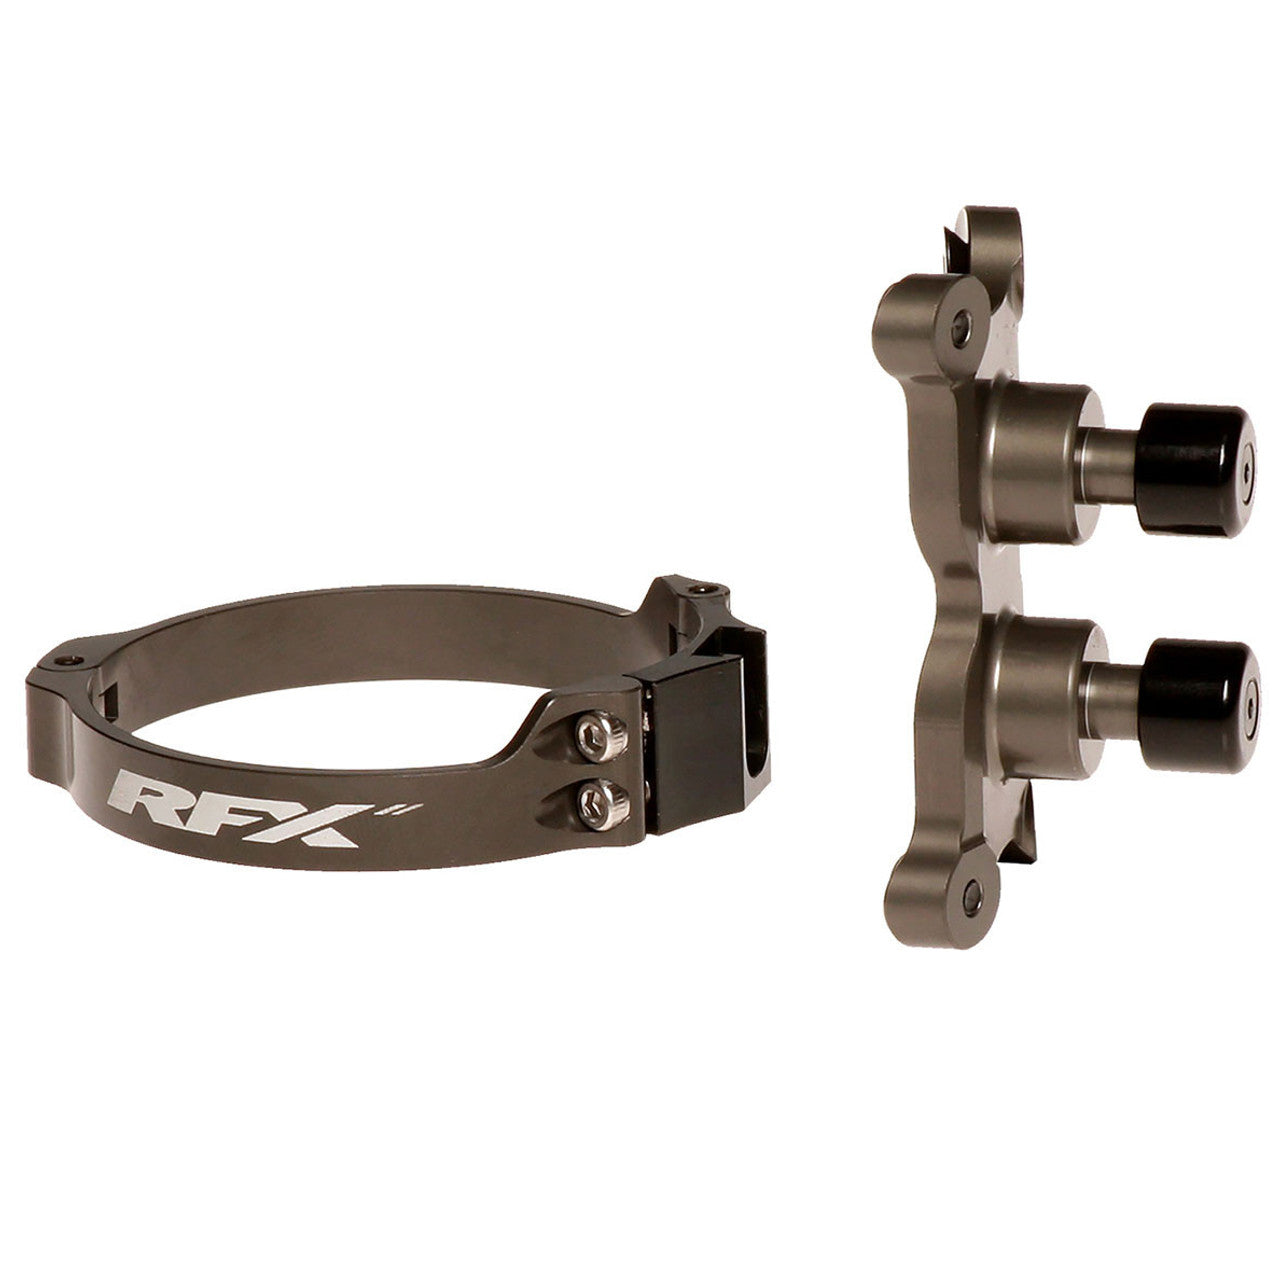 RFX Pro Series Dual Button Launch Control Hard Anodised - KTM